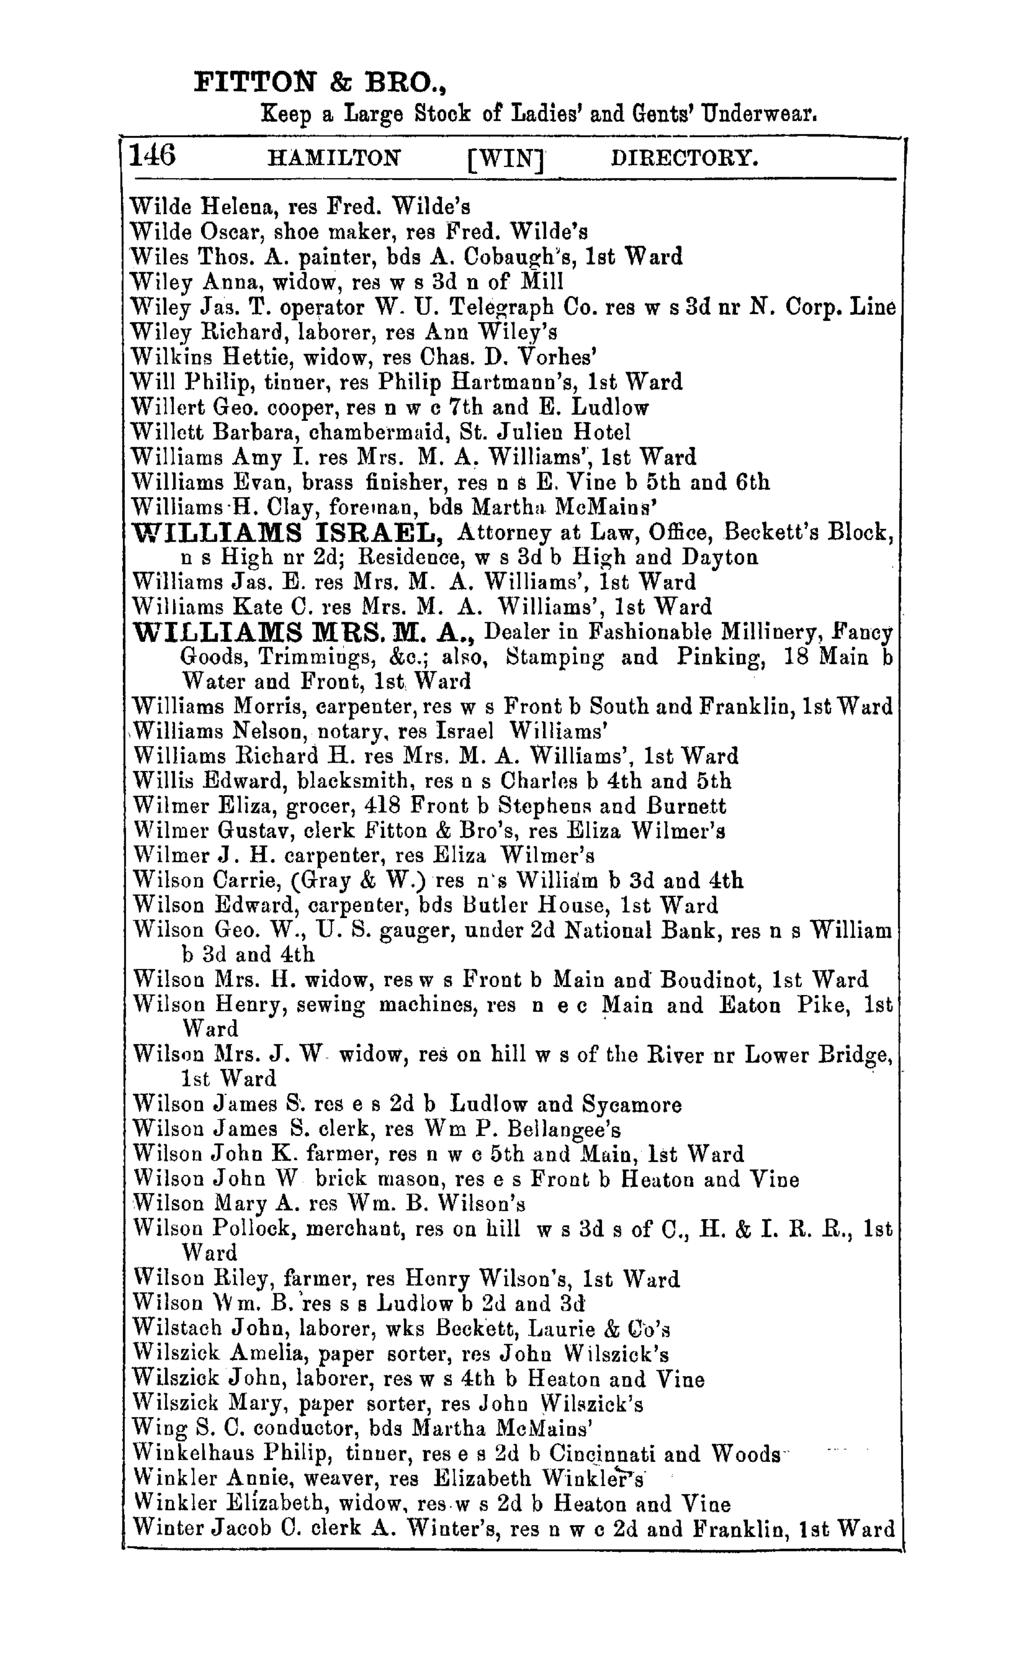 FITTON & BRO., Keep a Large Stock ot Ladies' and Gents' Underwear. 146 HAMILTON [WIN] DIRECTORY. Wilde Helena, res Fred. Wilde's Wilde Oscar, shoe maker, res Fred. Wilde's Wiles Thos. A.